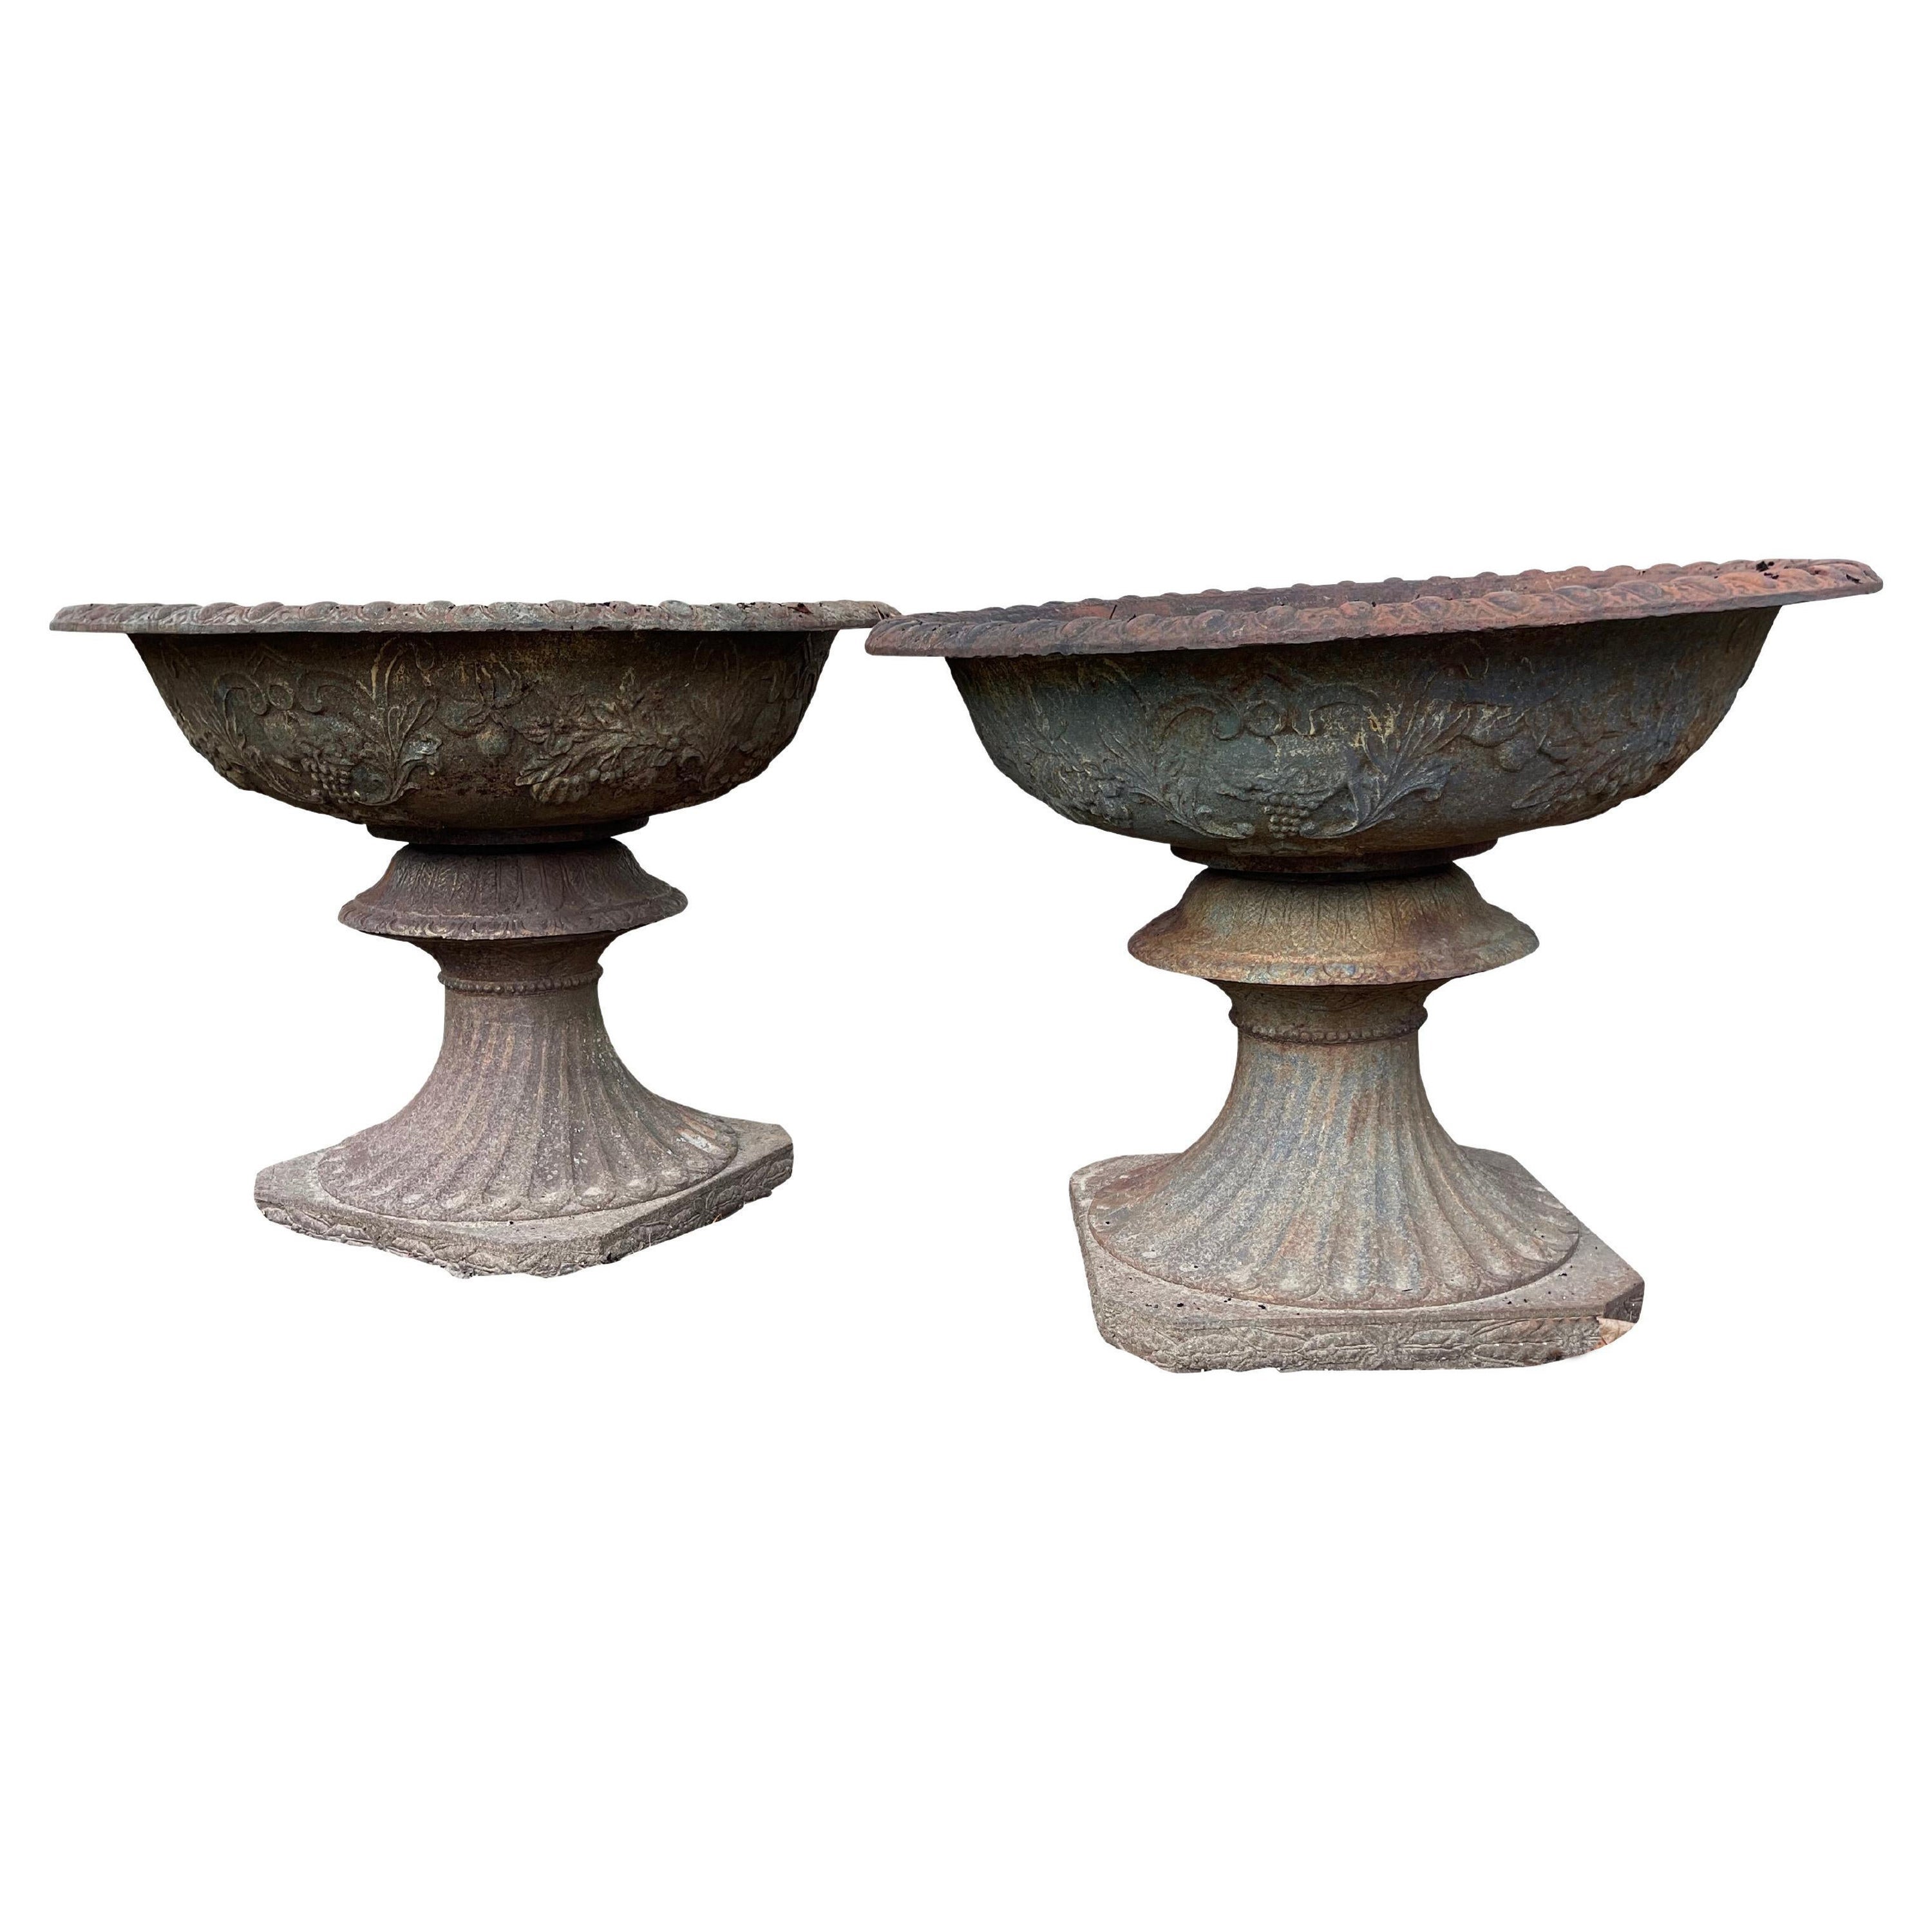  Cast Iron Urns with Foliate and Grape Design